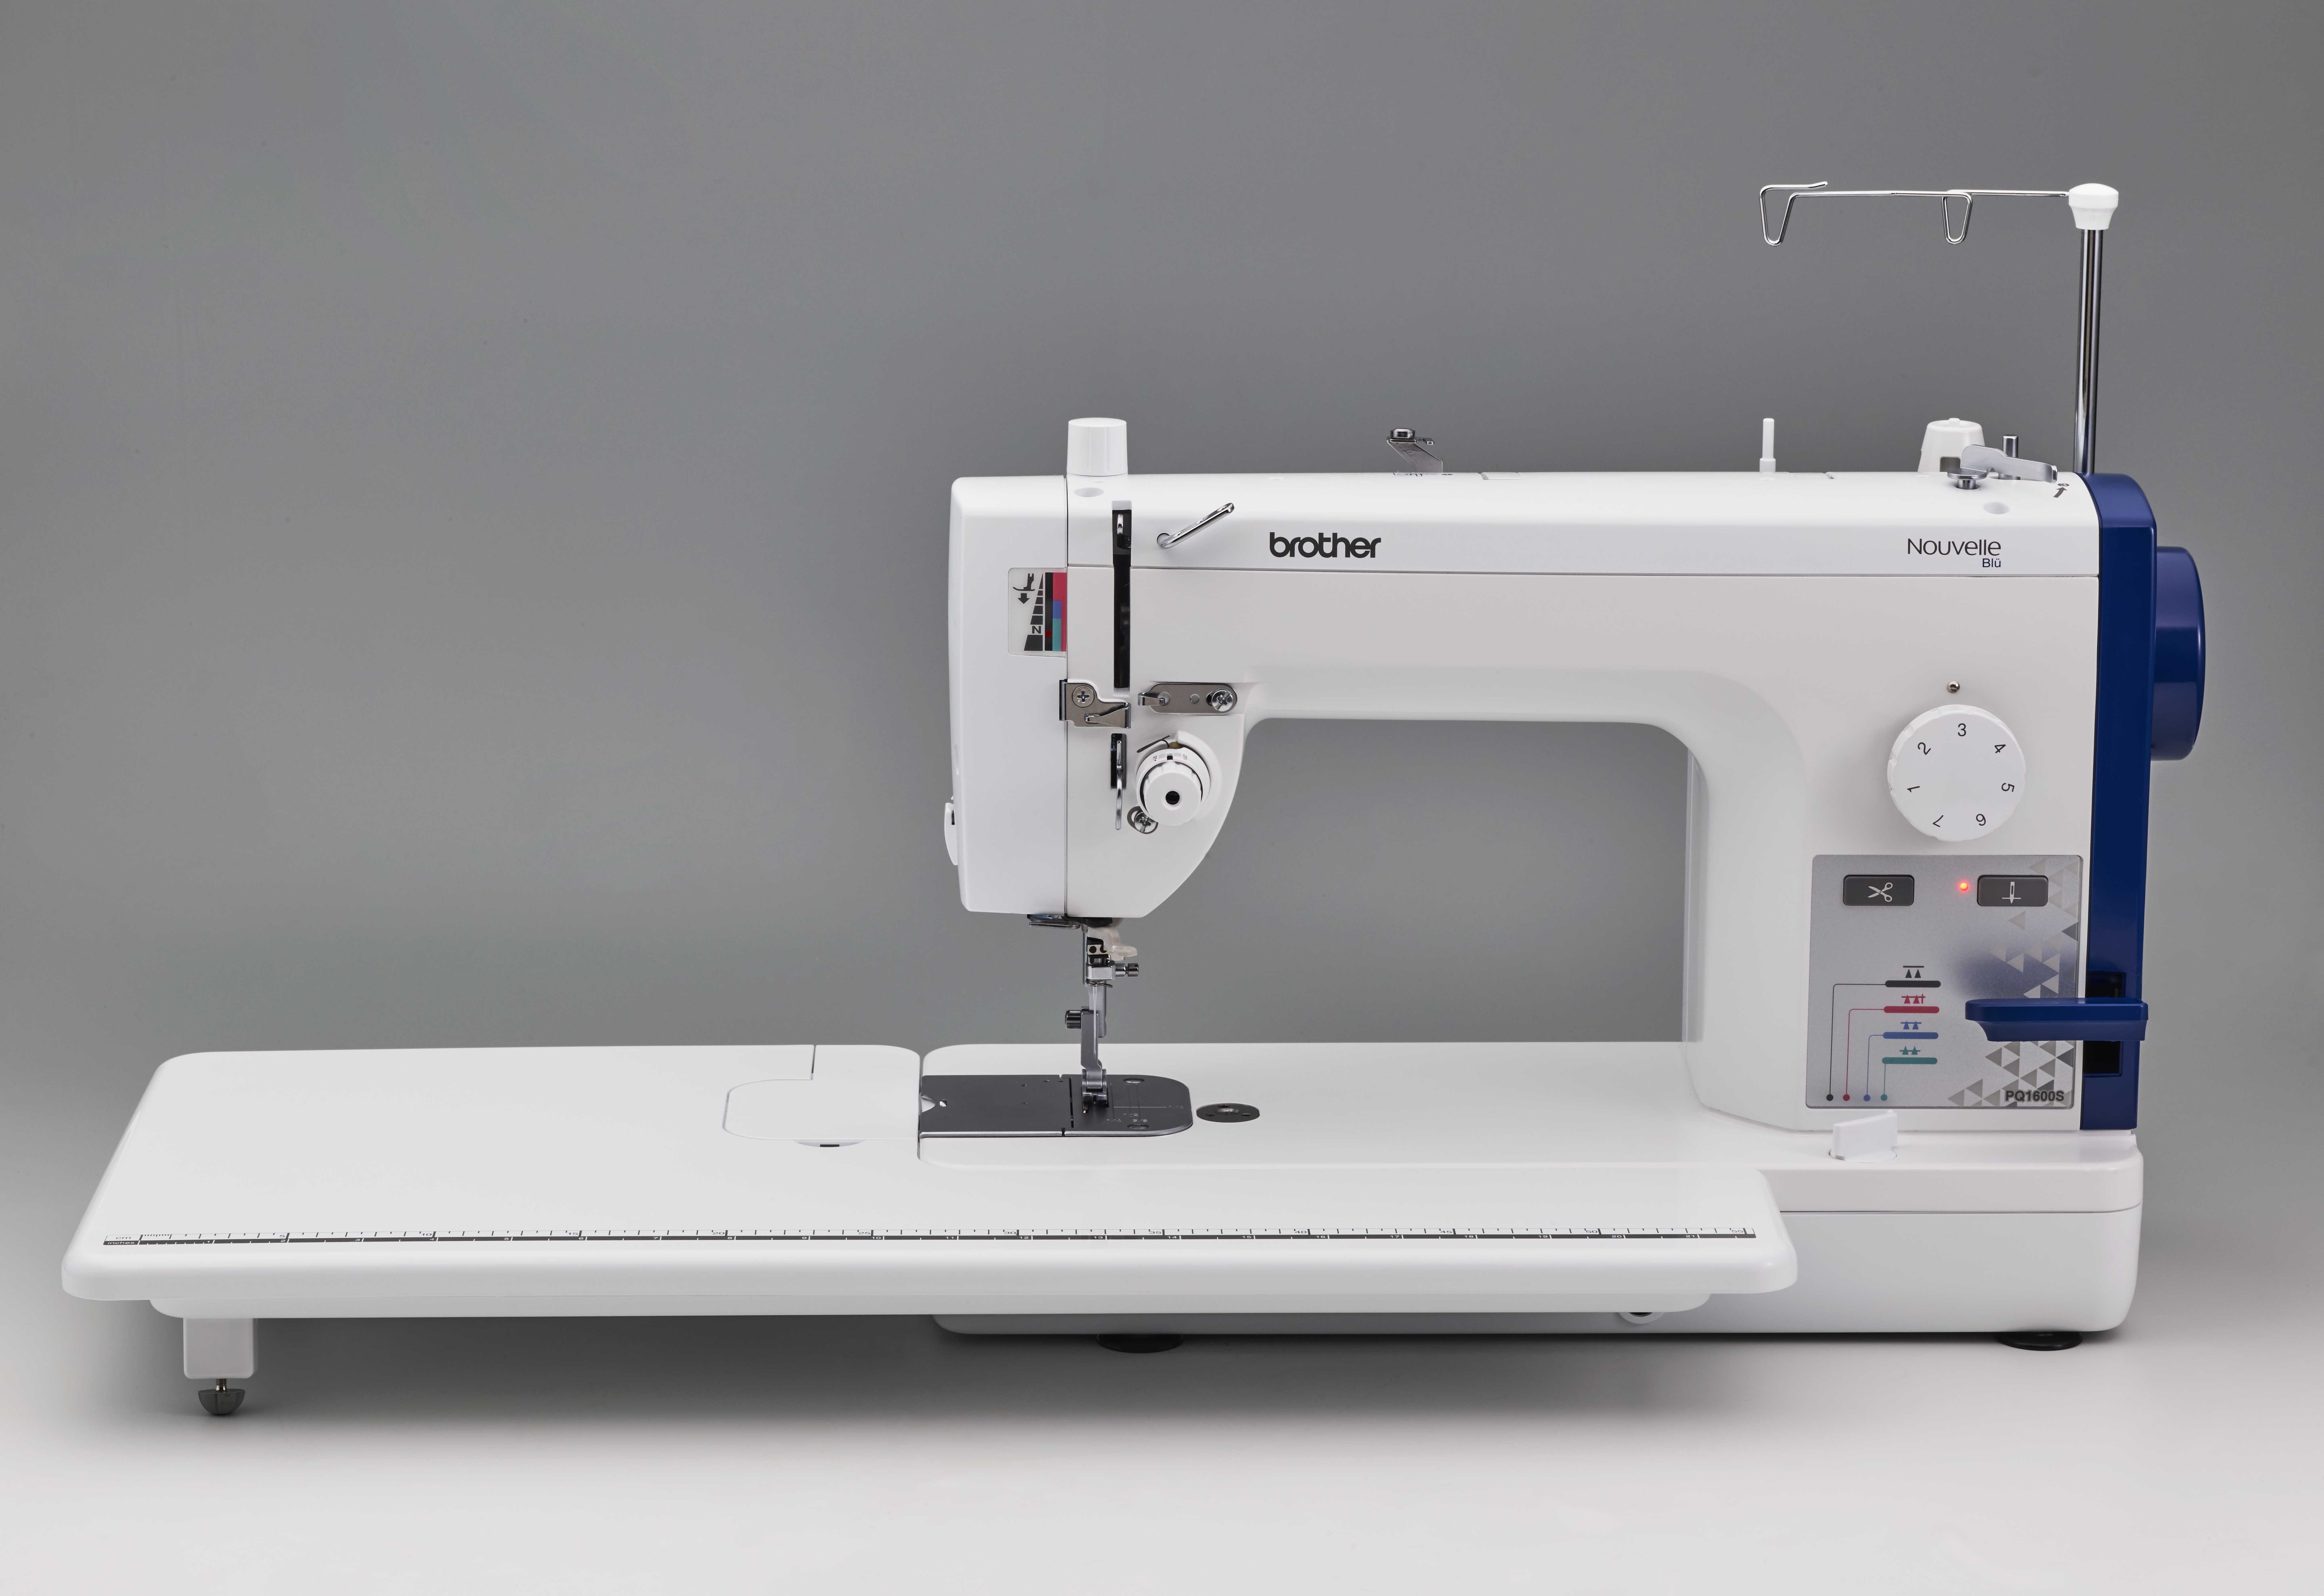 Sewing and Embroidery Machine - Home Sewing Products - Brother